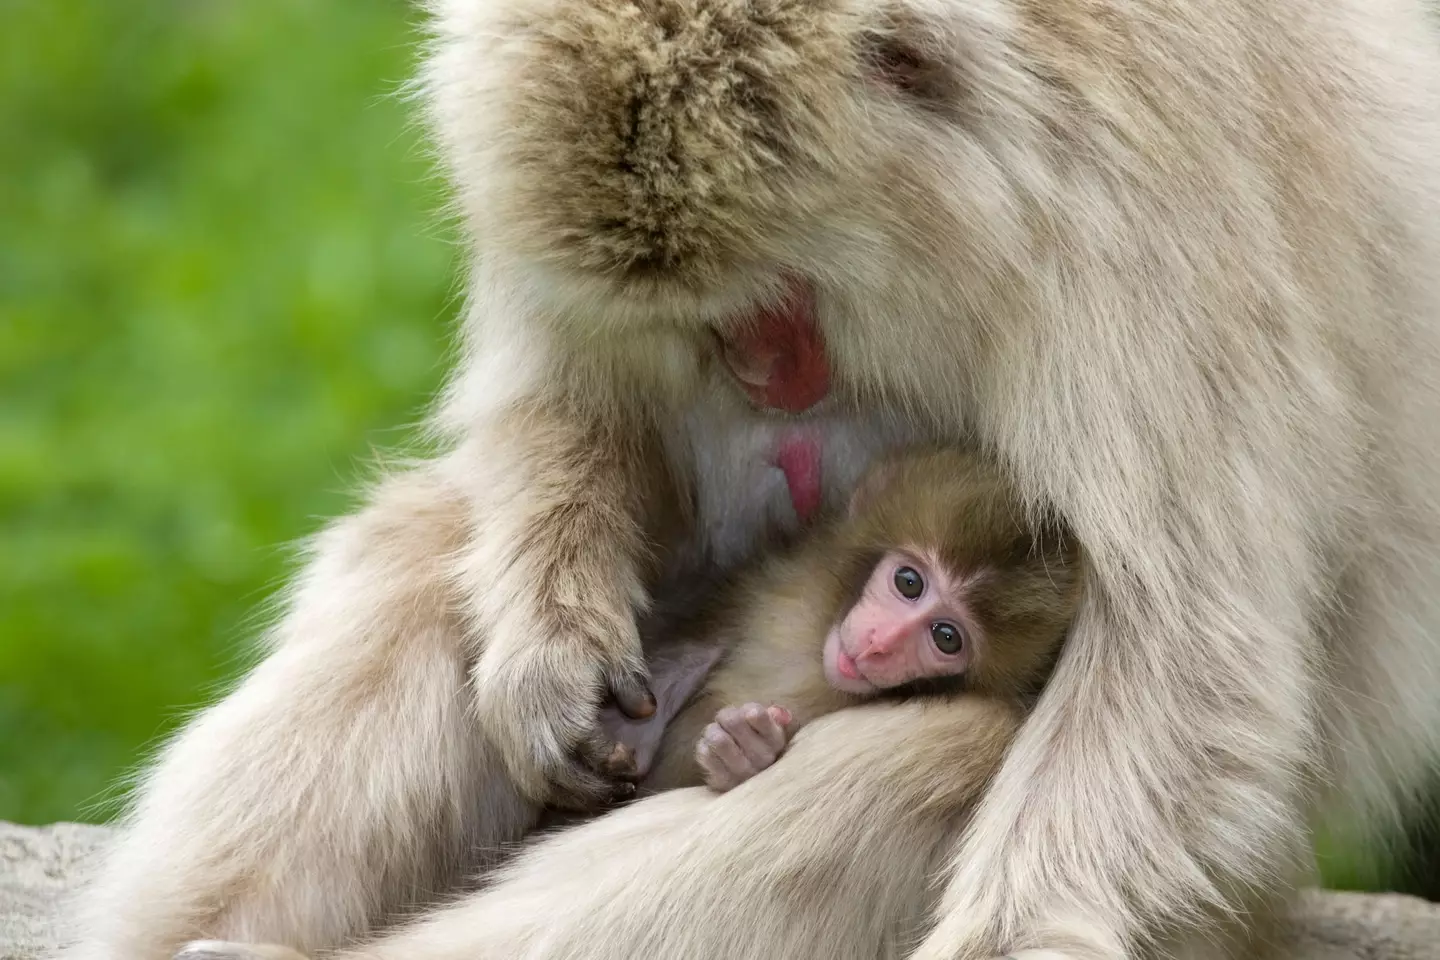 The markings found in the monkey's teeth has challenged existing ideas of how human beings evolved. (Alamy)